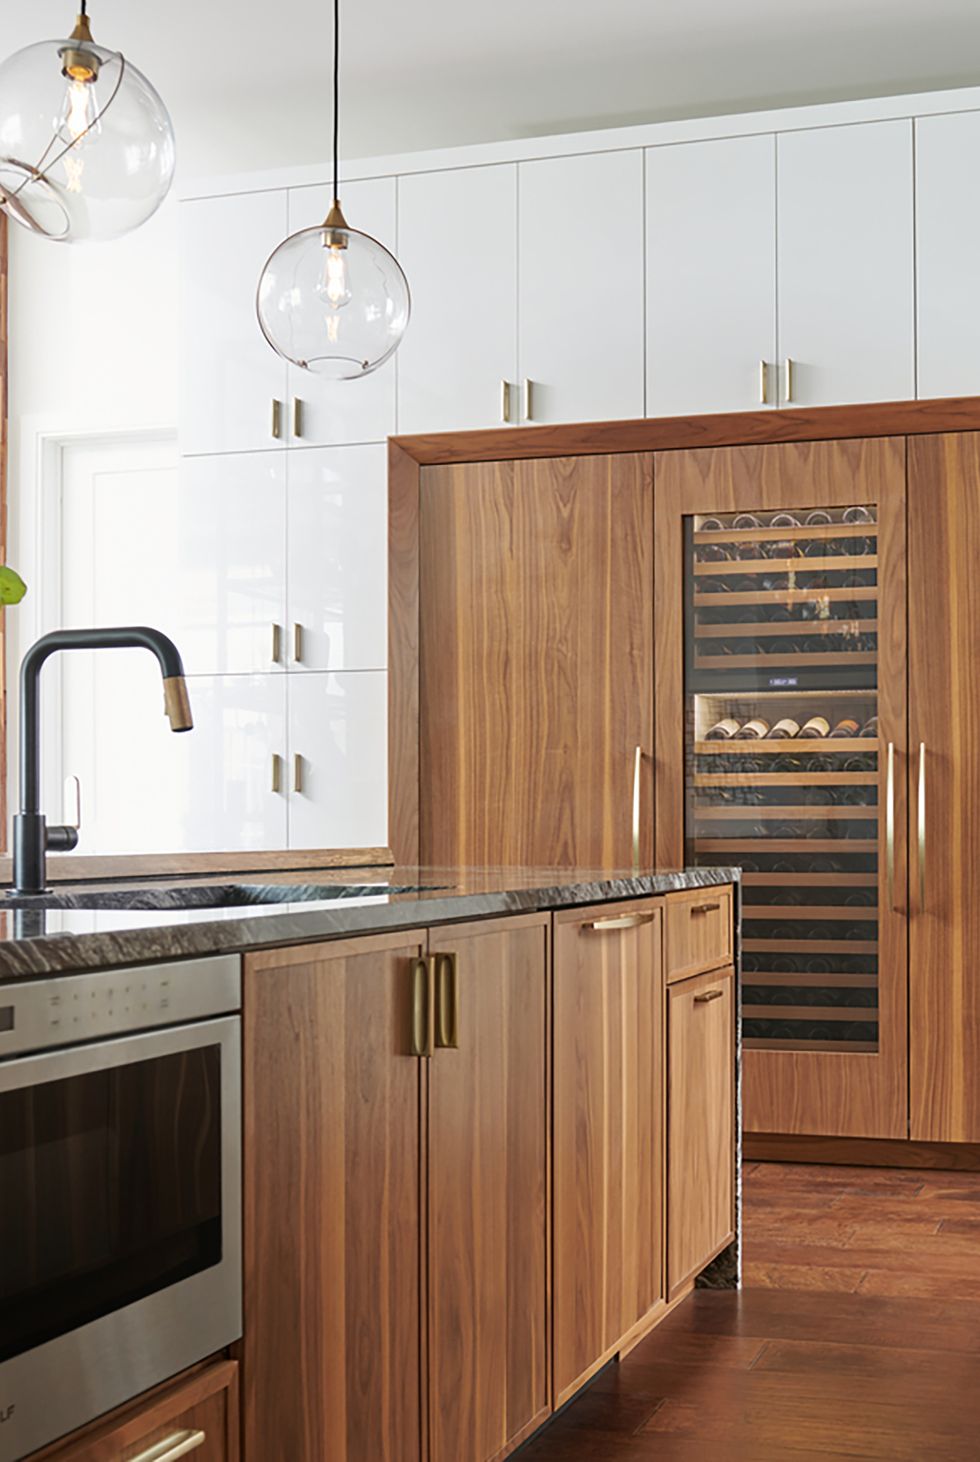 Modern wood cabinets with wooden refrigerator doors and wine refrigerator.